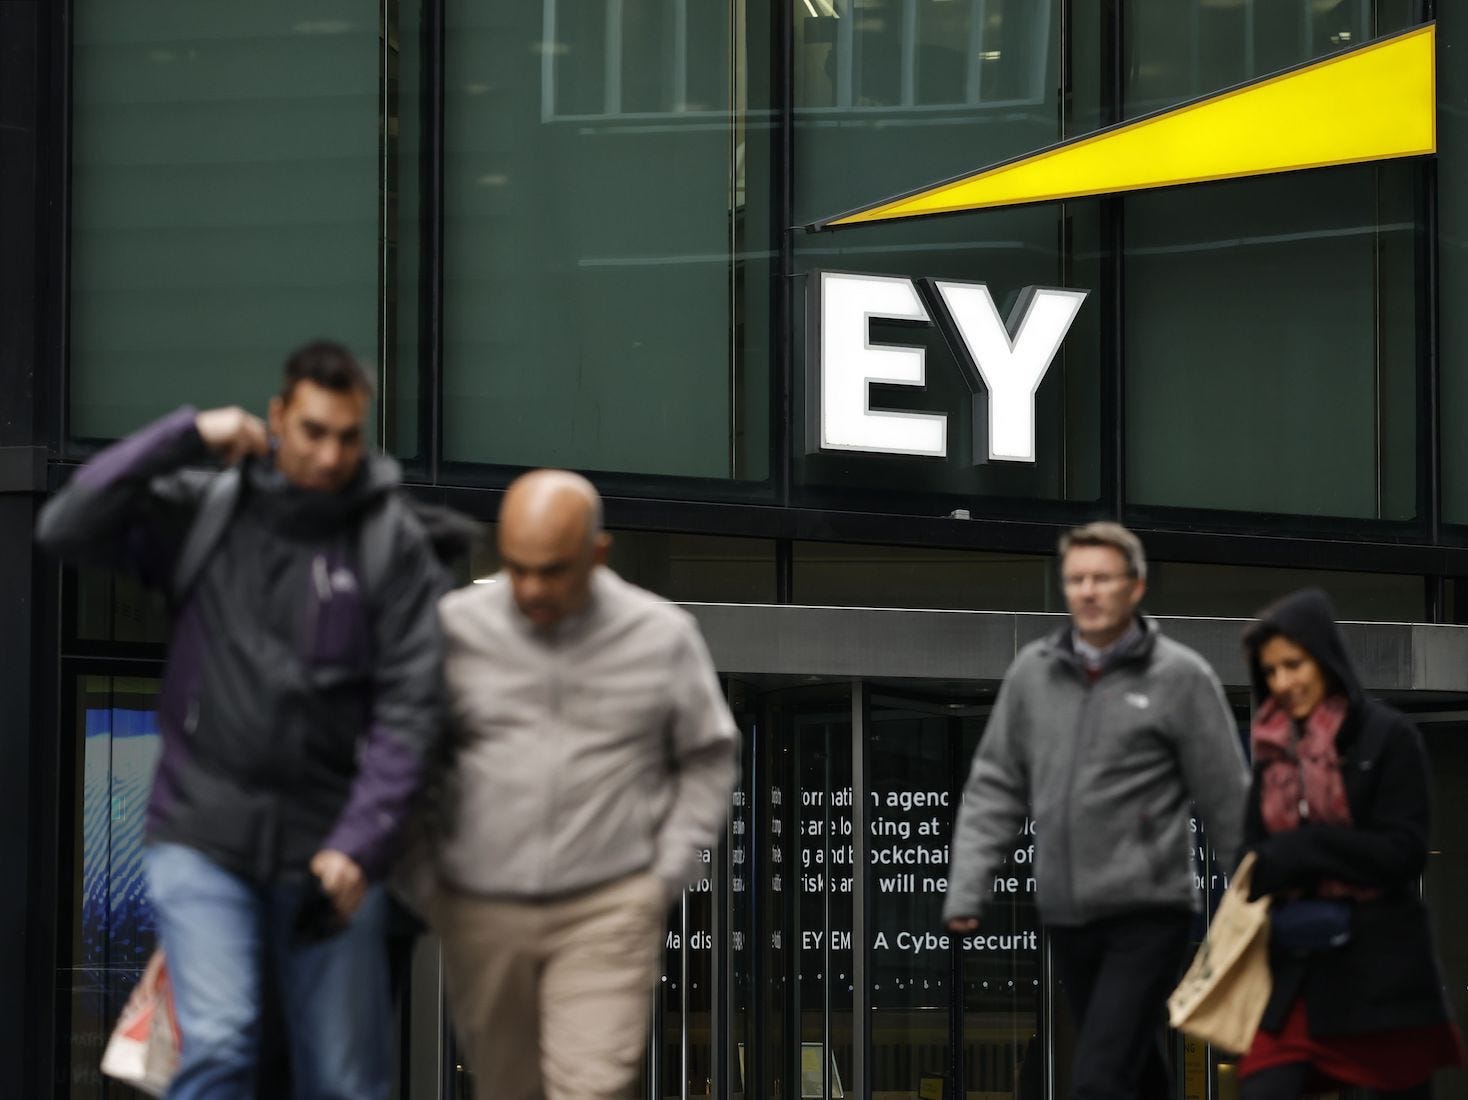 Pedestrians walk in front of the entrance to EY's head office in London.